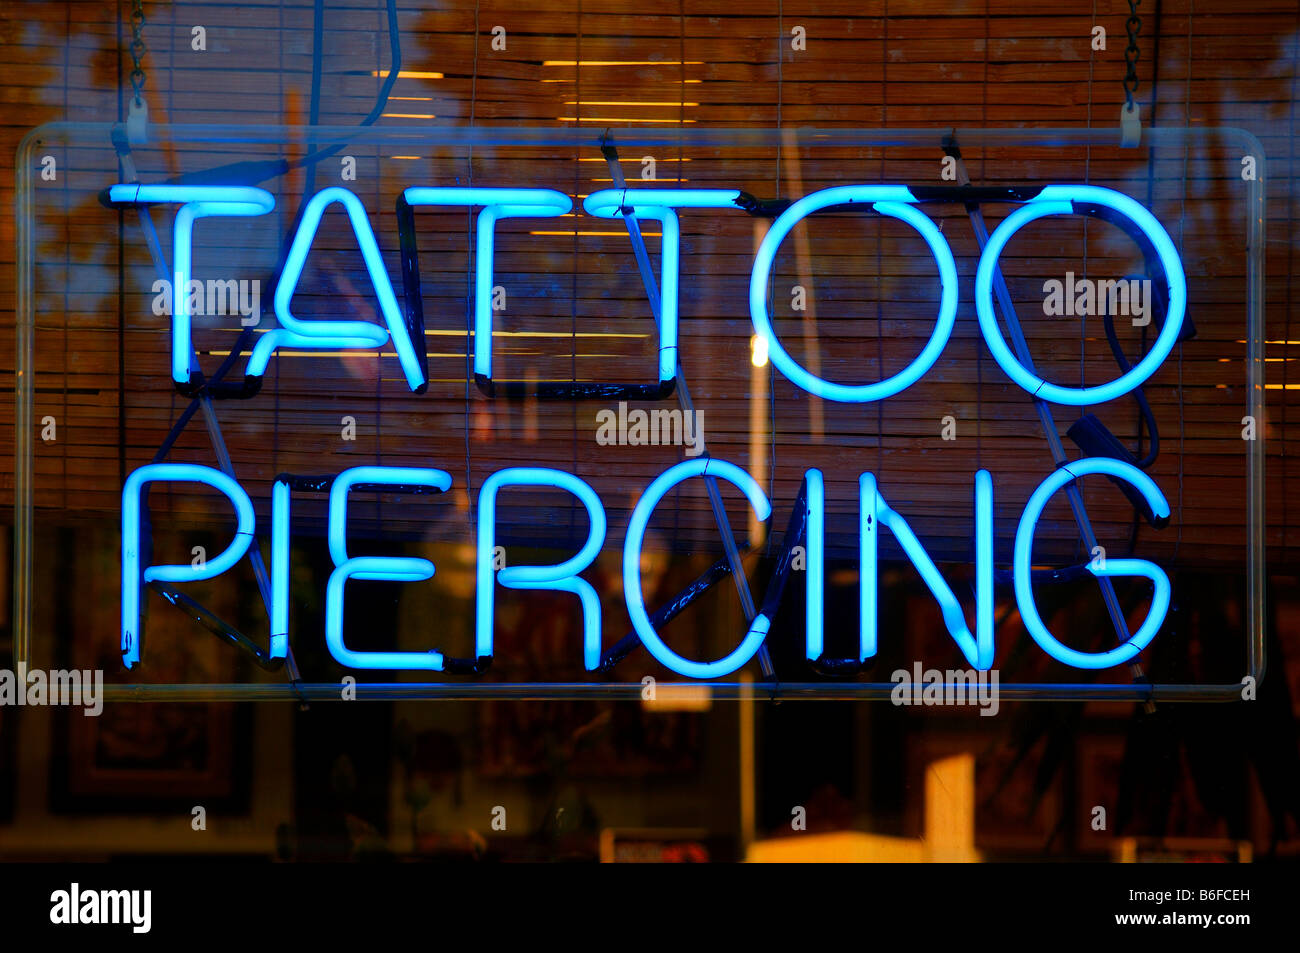 En néon, Tattoo Piercing, New York, NY, USA Banque D'Images